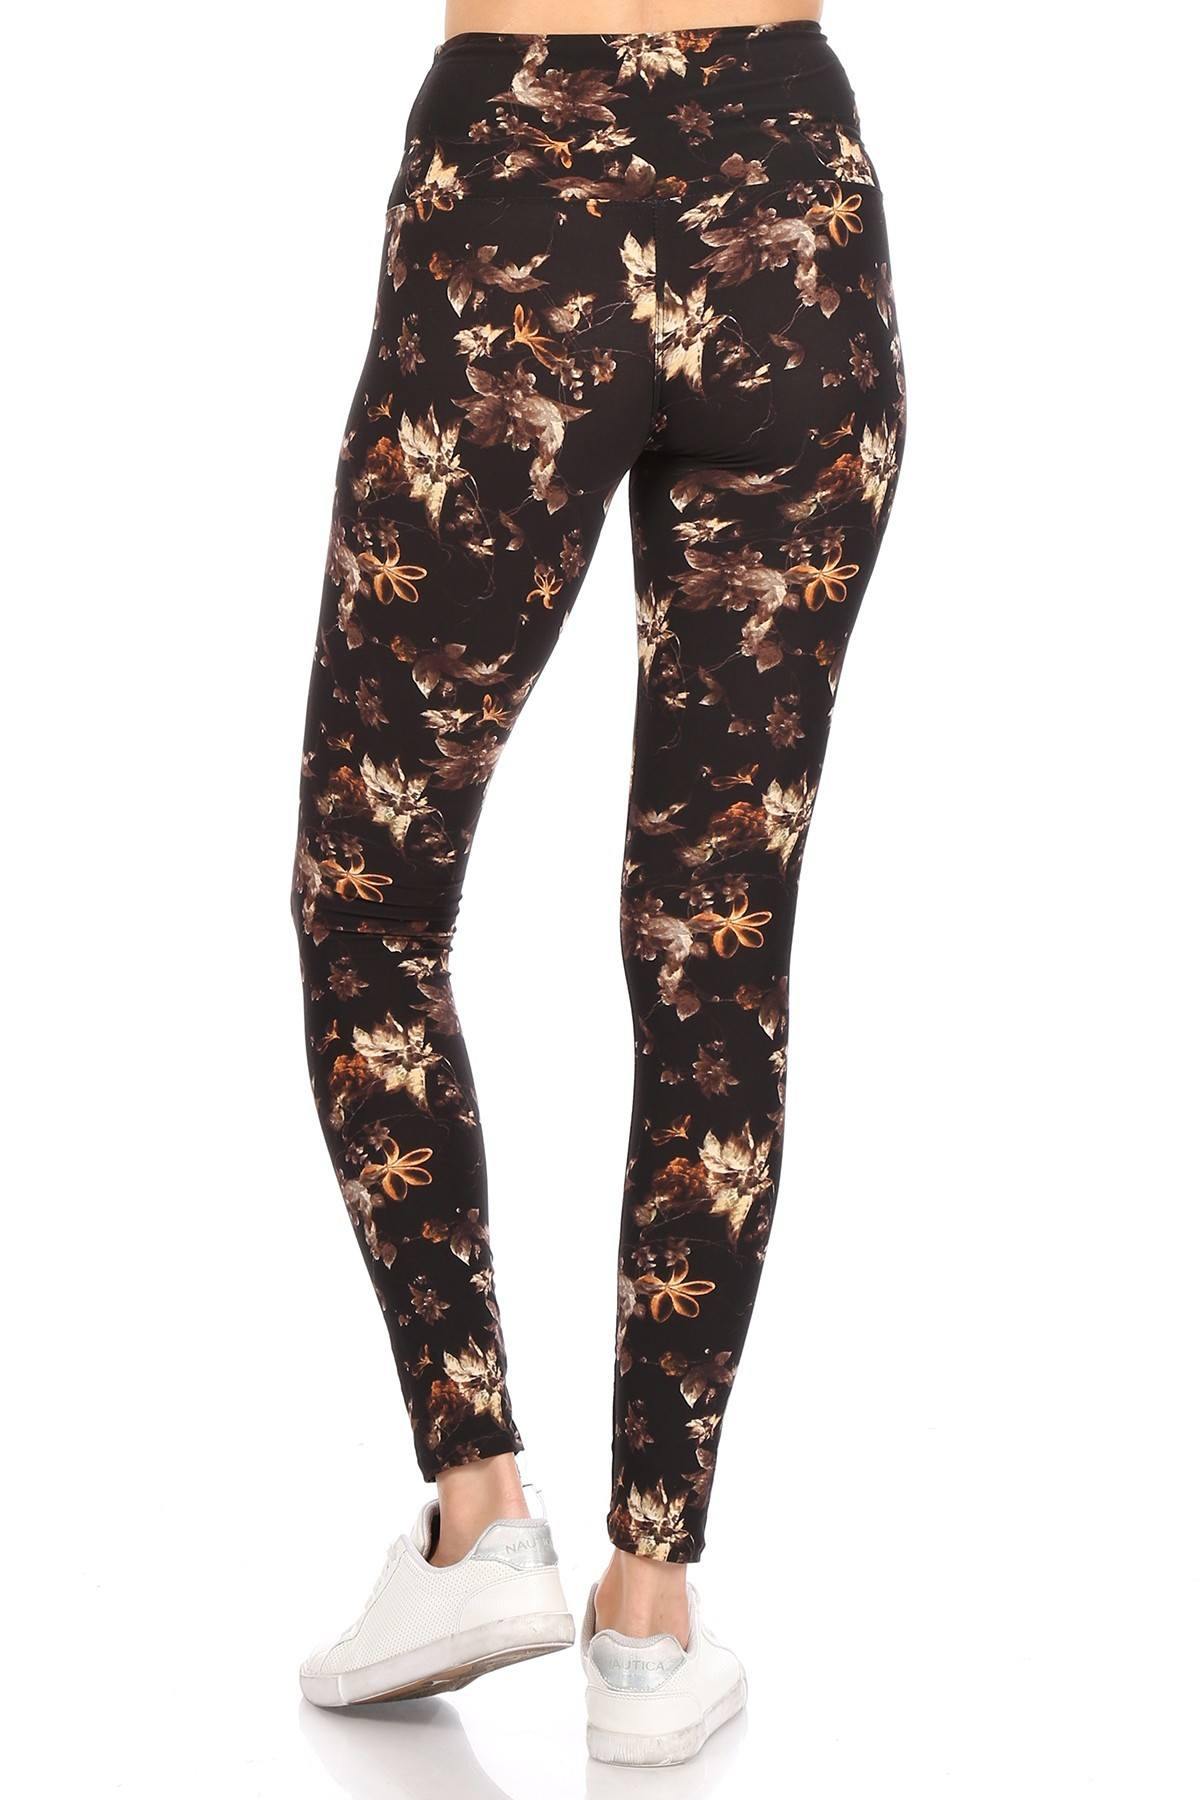 5-inch Long Yoga Style Banded Lined Multi Printed Knit Legging With High Waist - Pearlara